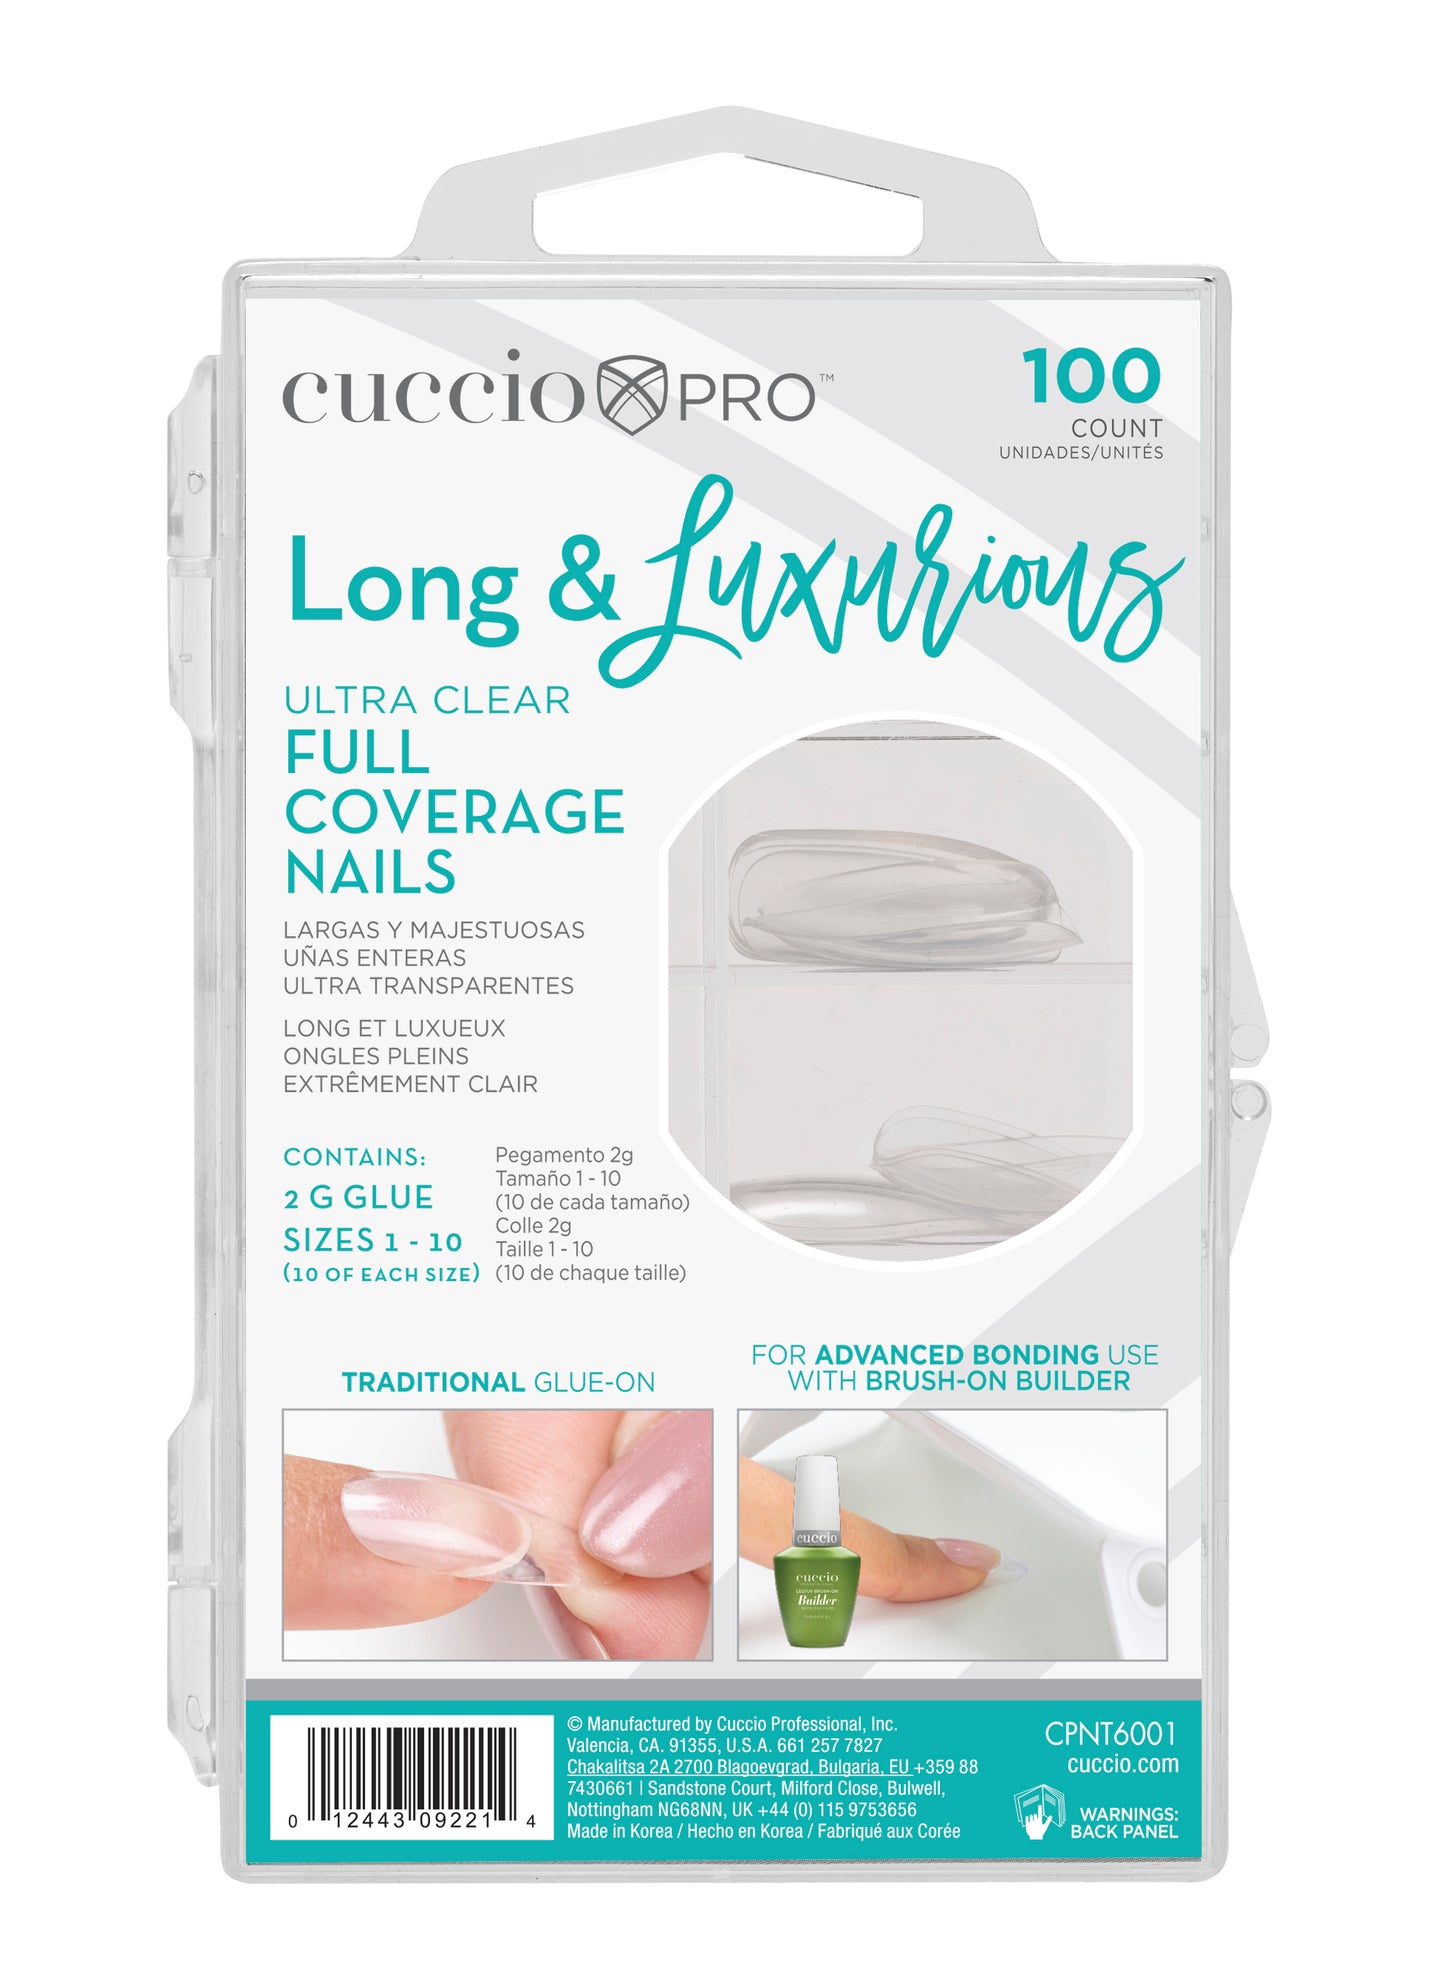 Full Coverage Nail Tips - Long & Luxurious - 100 Count